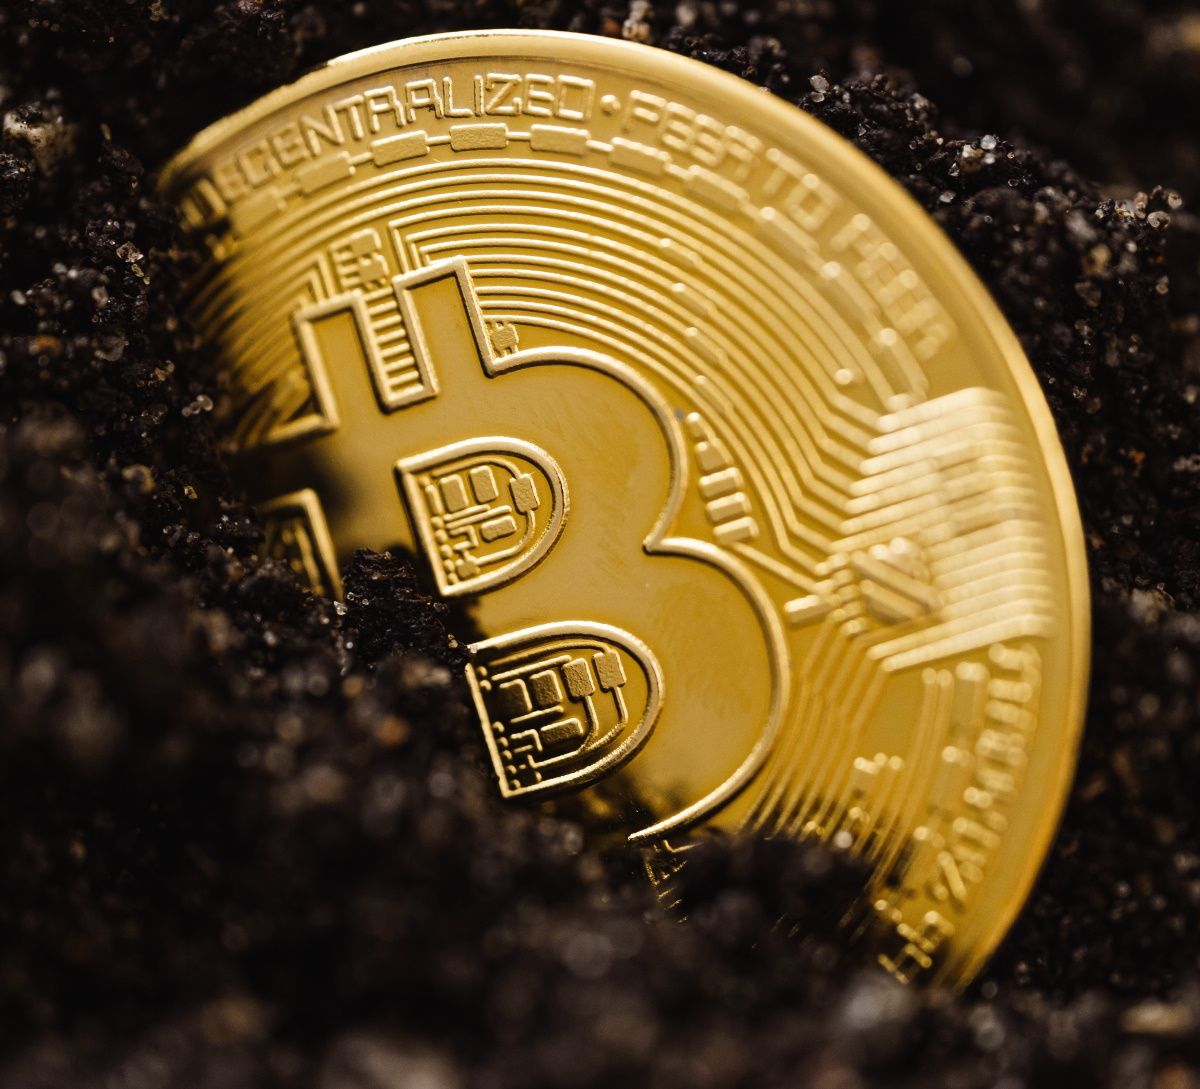 A golden coin with Bitcoin's symbol on it among the dirt.